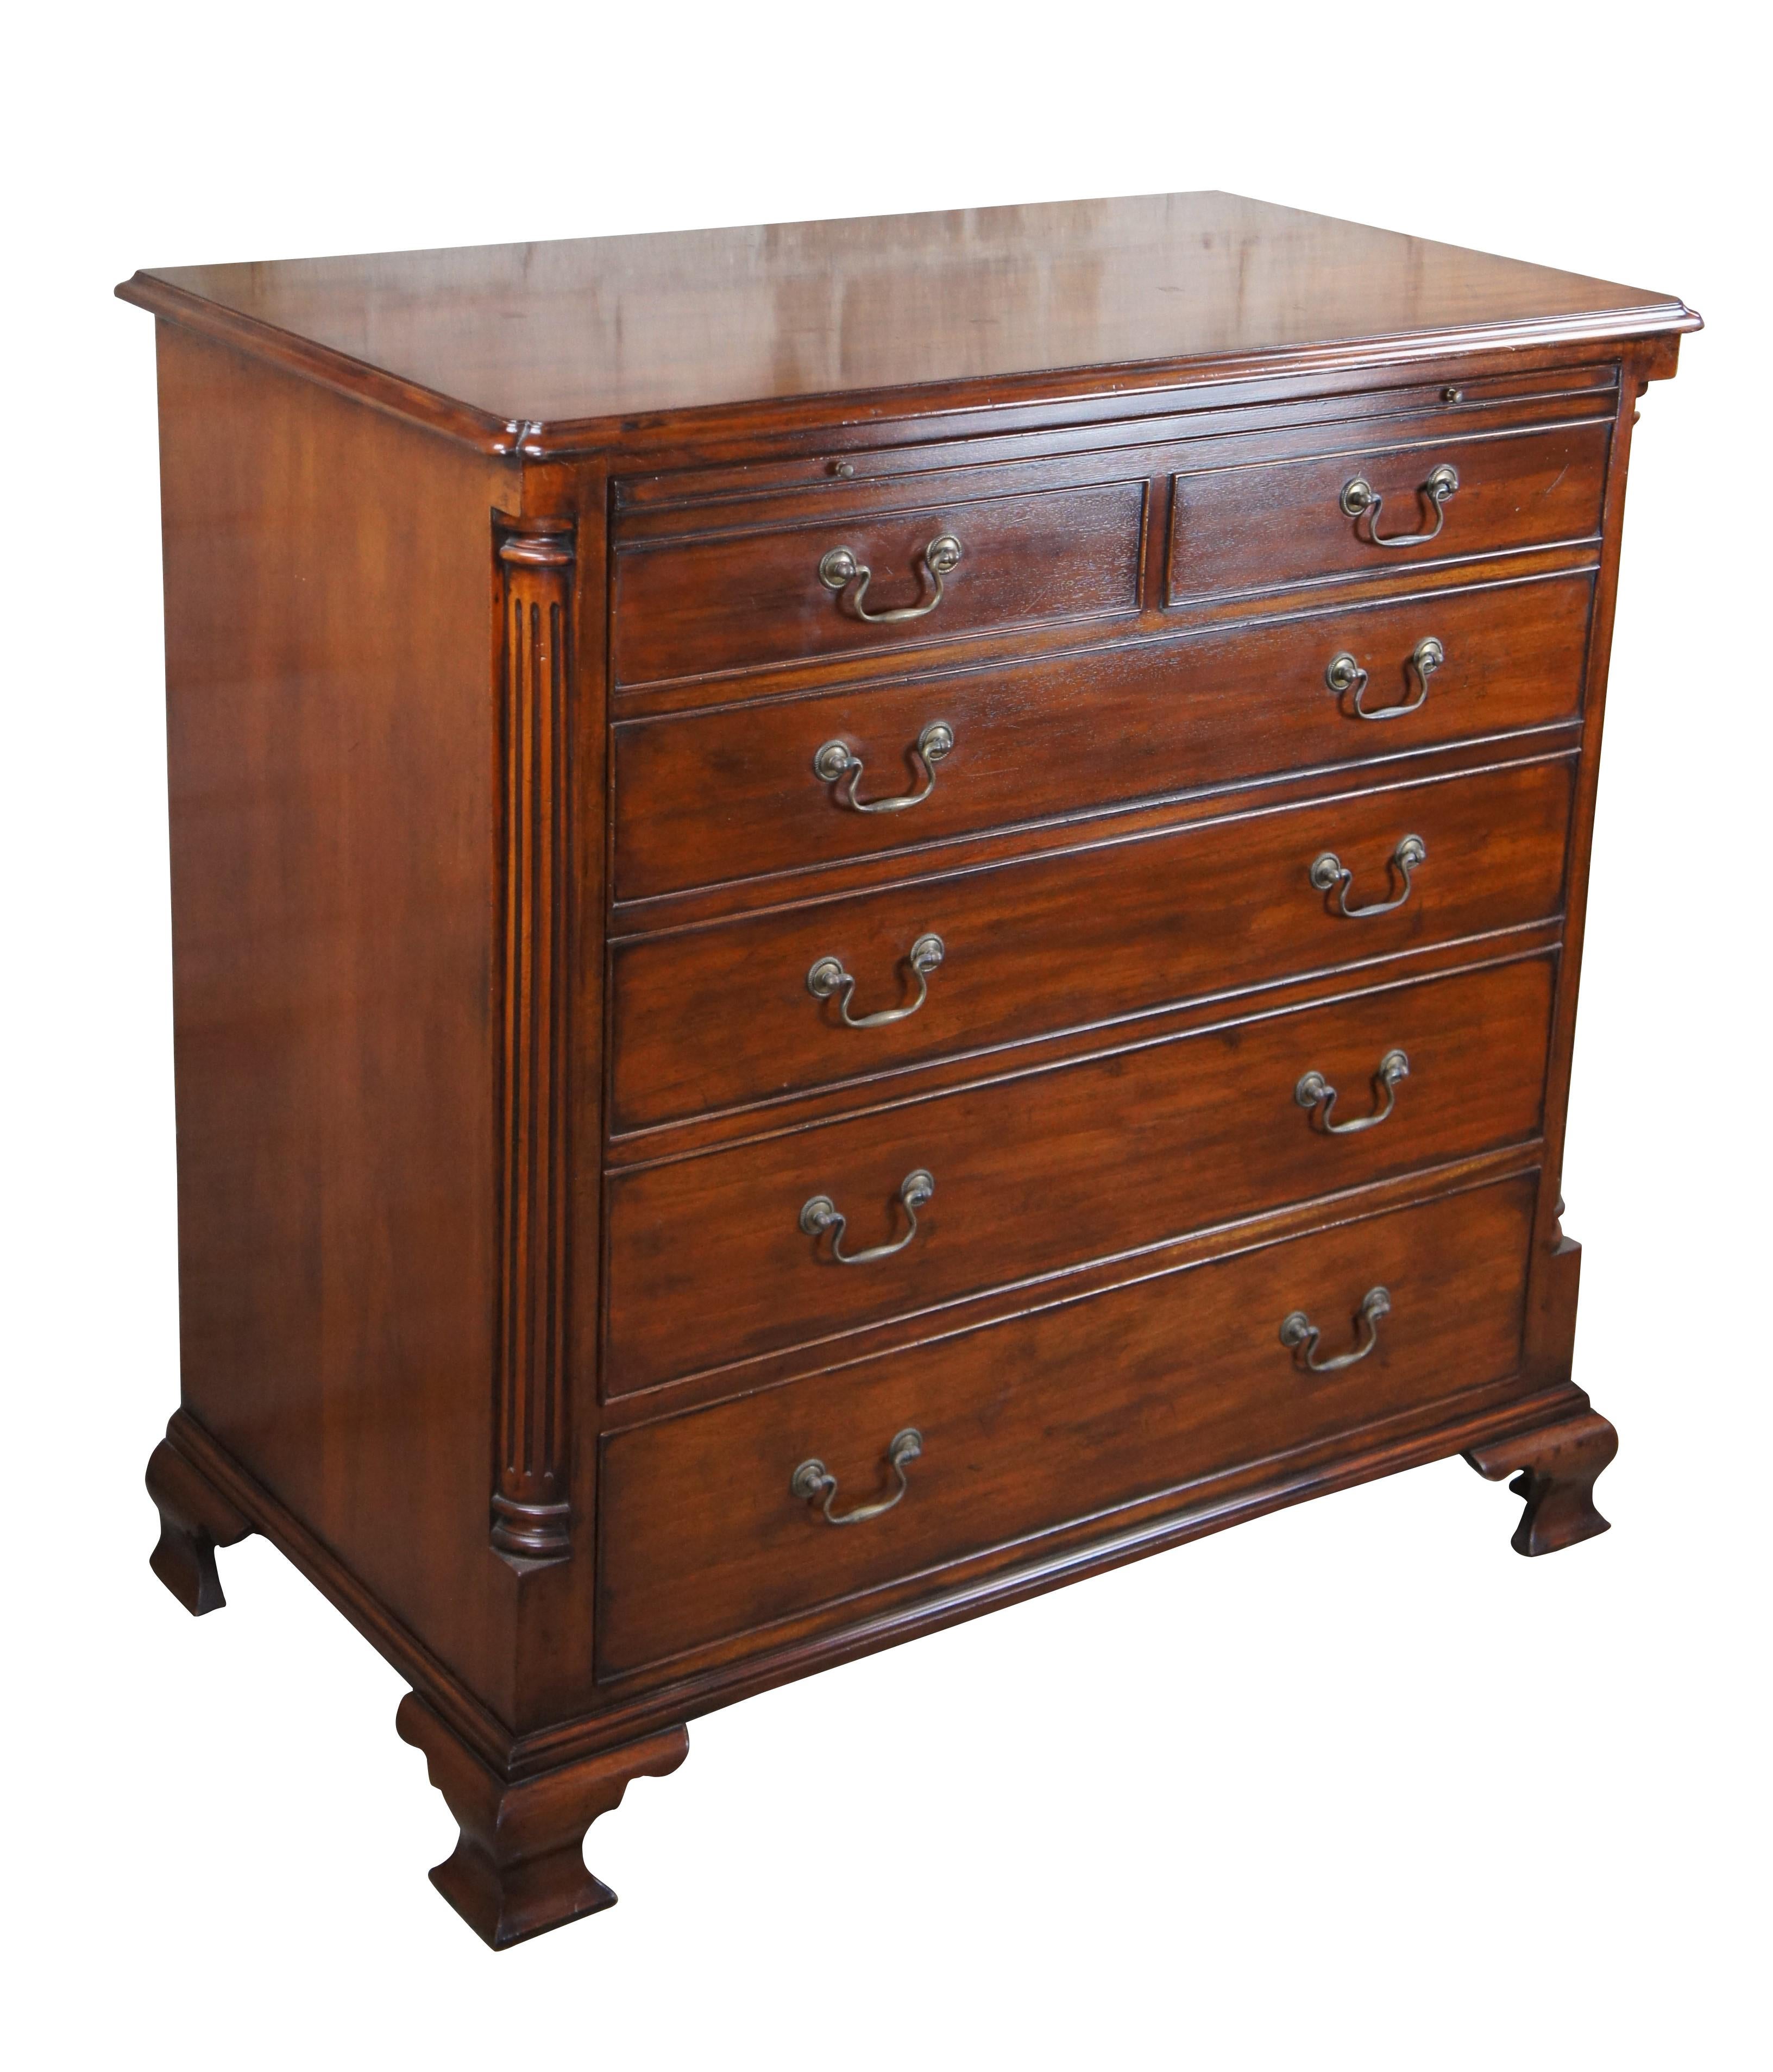 An exquisite 18th Century reproduction in the form of a mahogany bachelors chest by Arthur Brett. Features a faux 2 over 4 drawer graduated design which draws forward and slides back to reveal an interior compartment intended for a television.